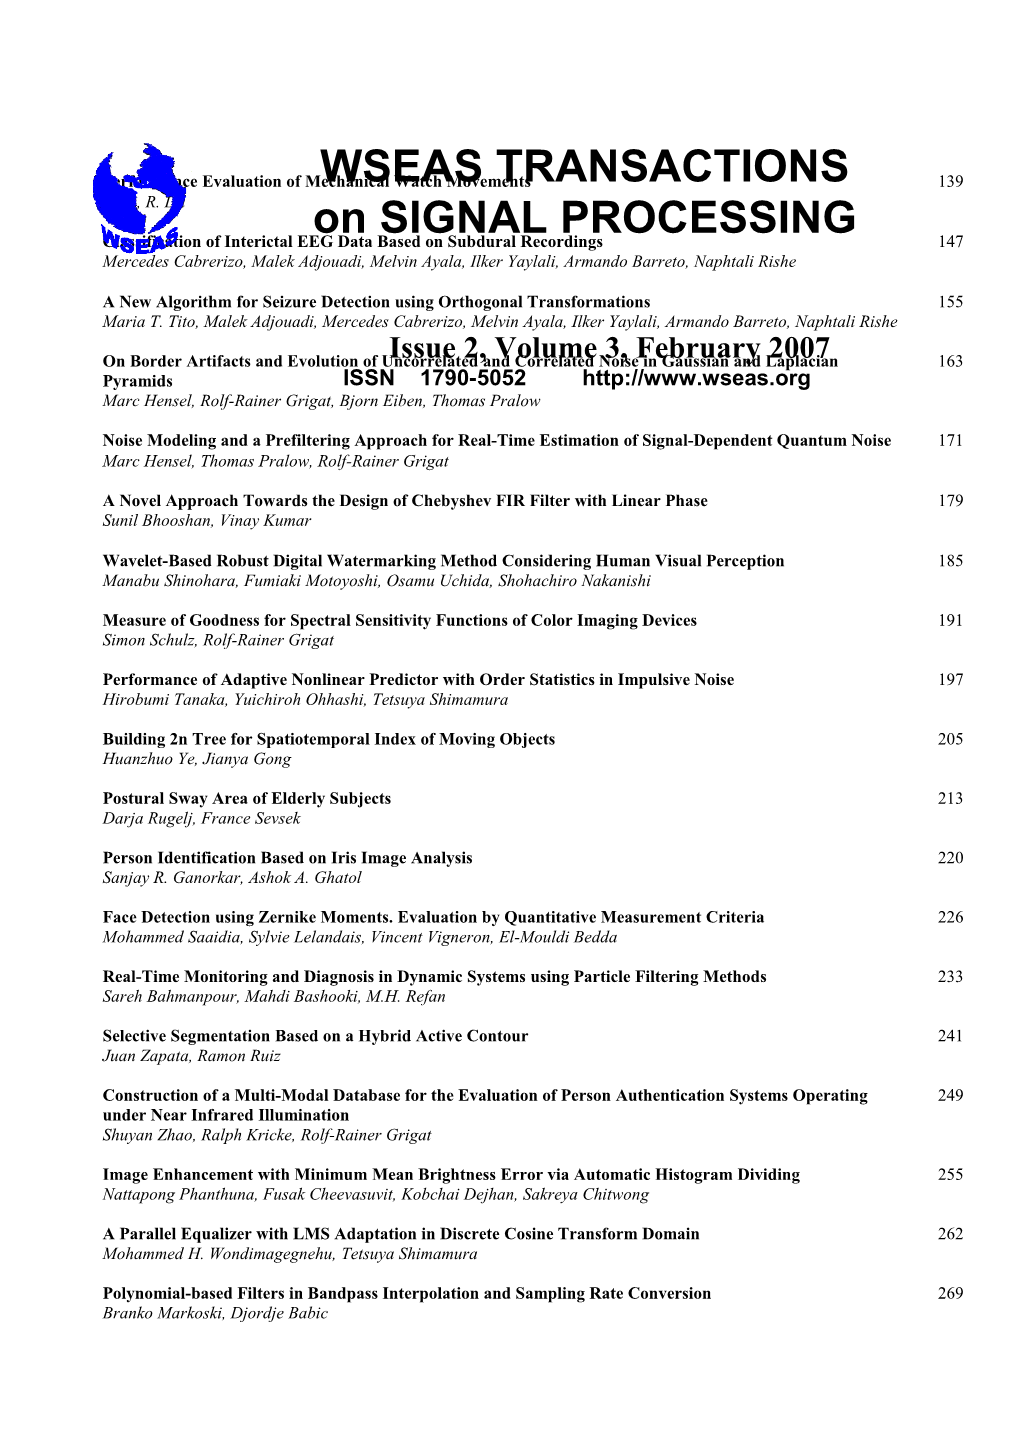 WSEAS Trans. on SIGNAL PROCESSING, February 2007